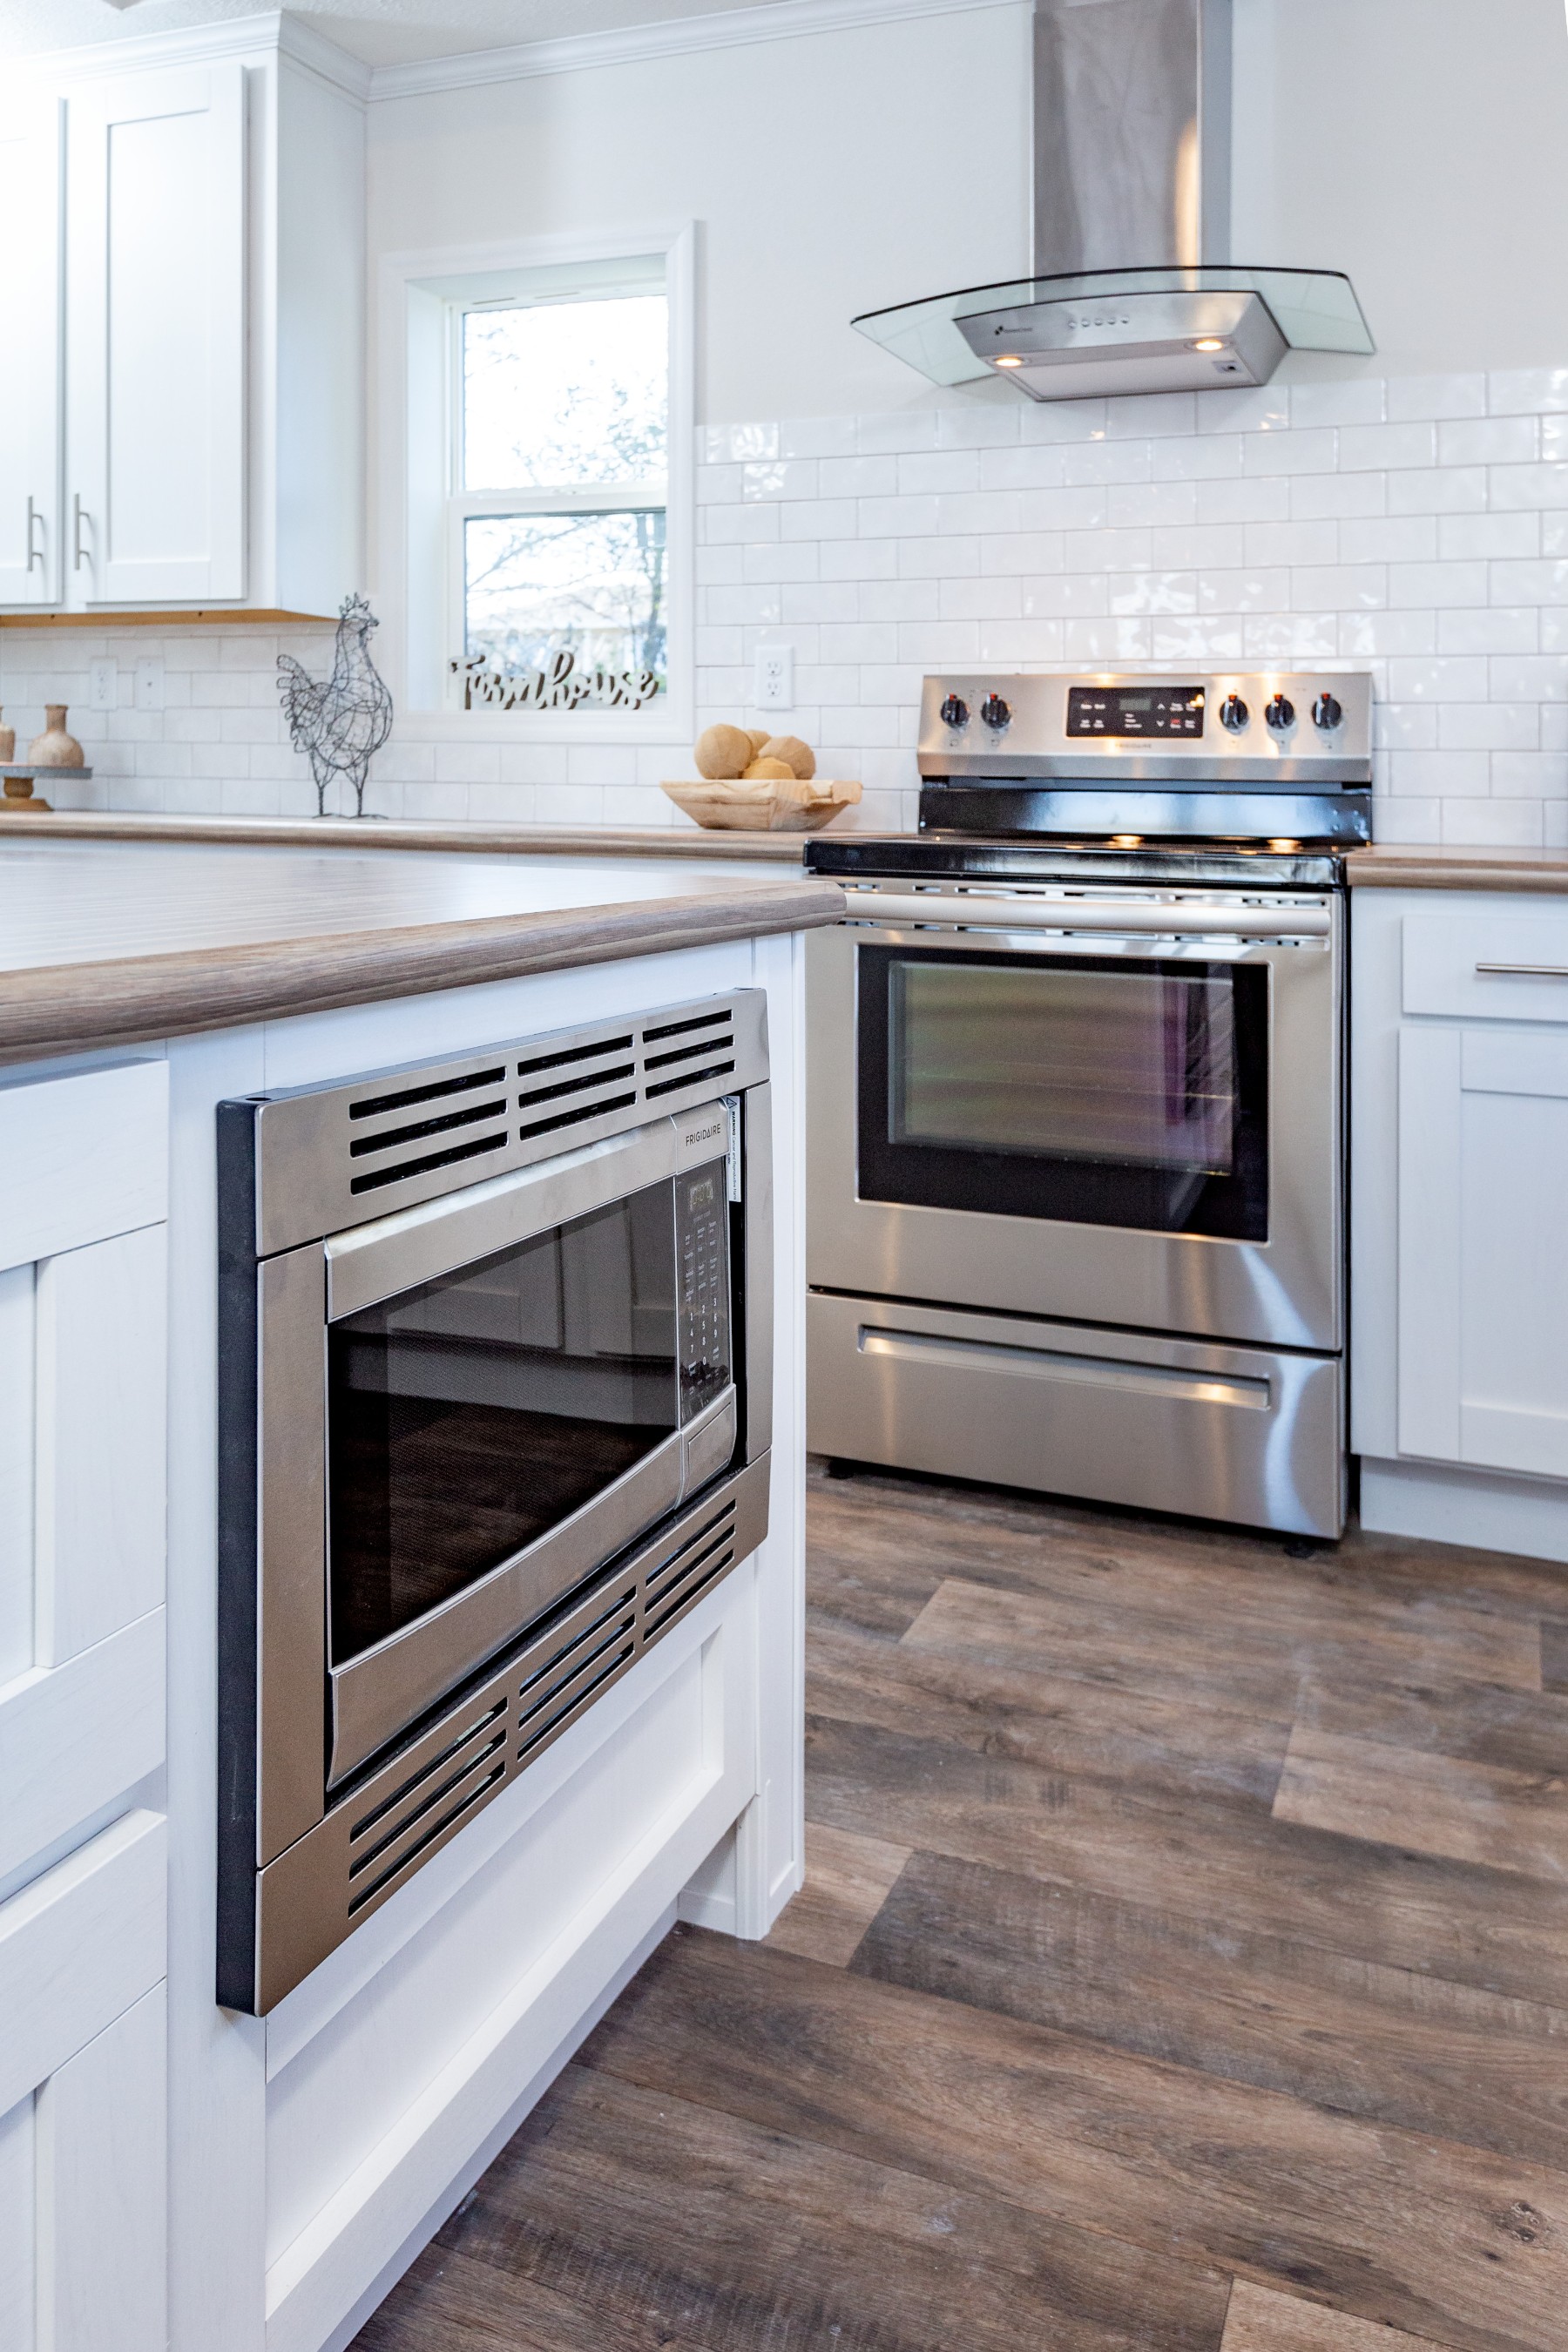 Frigidaire offers modern, family-friendly designs purposefully crafted with time-saving solutions, like premium fingerprint-resistant Smudge-Proof finishes.